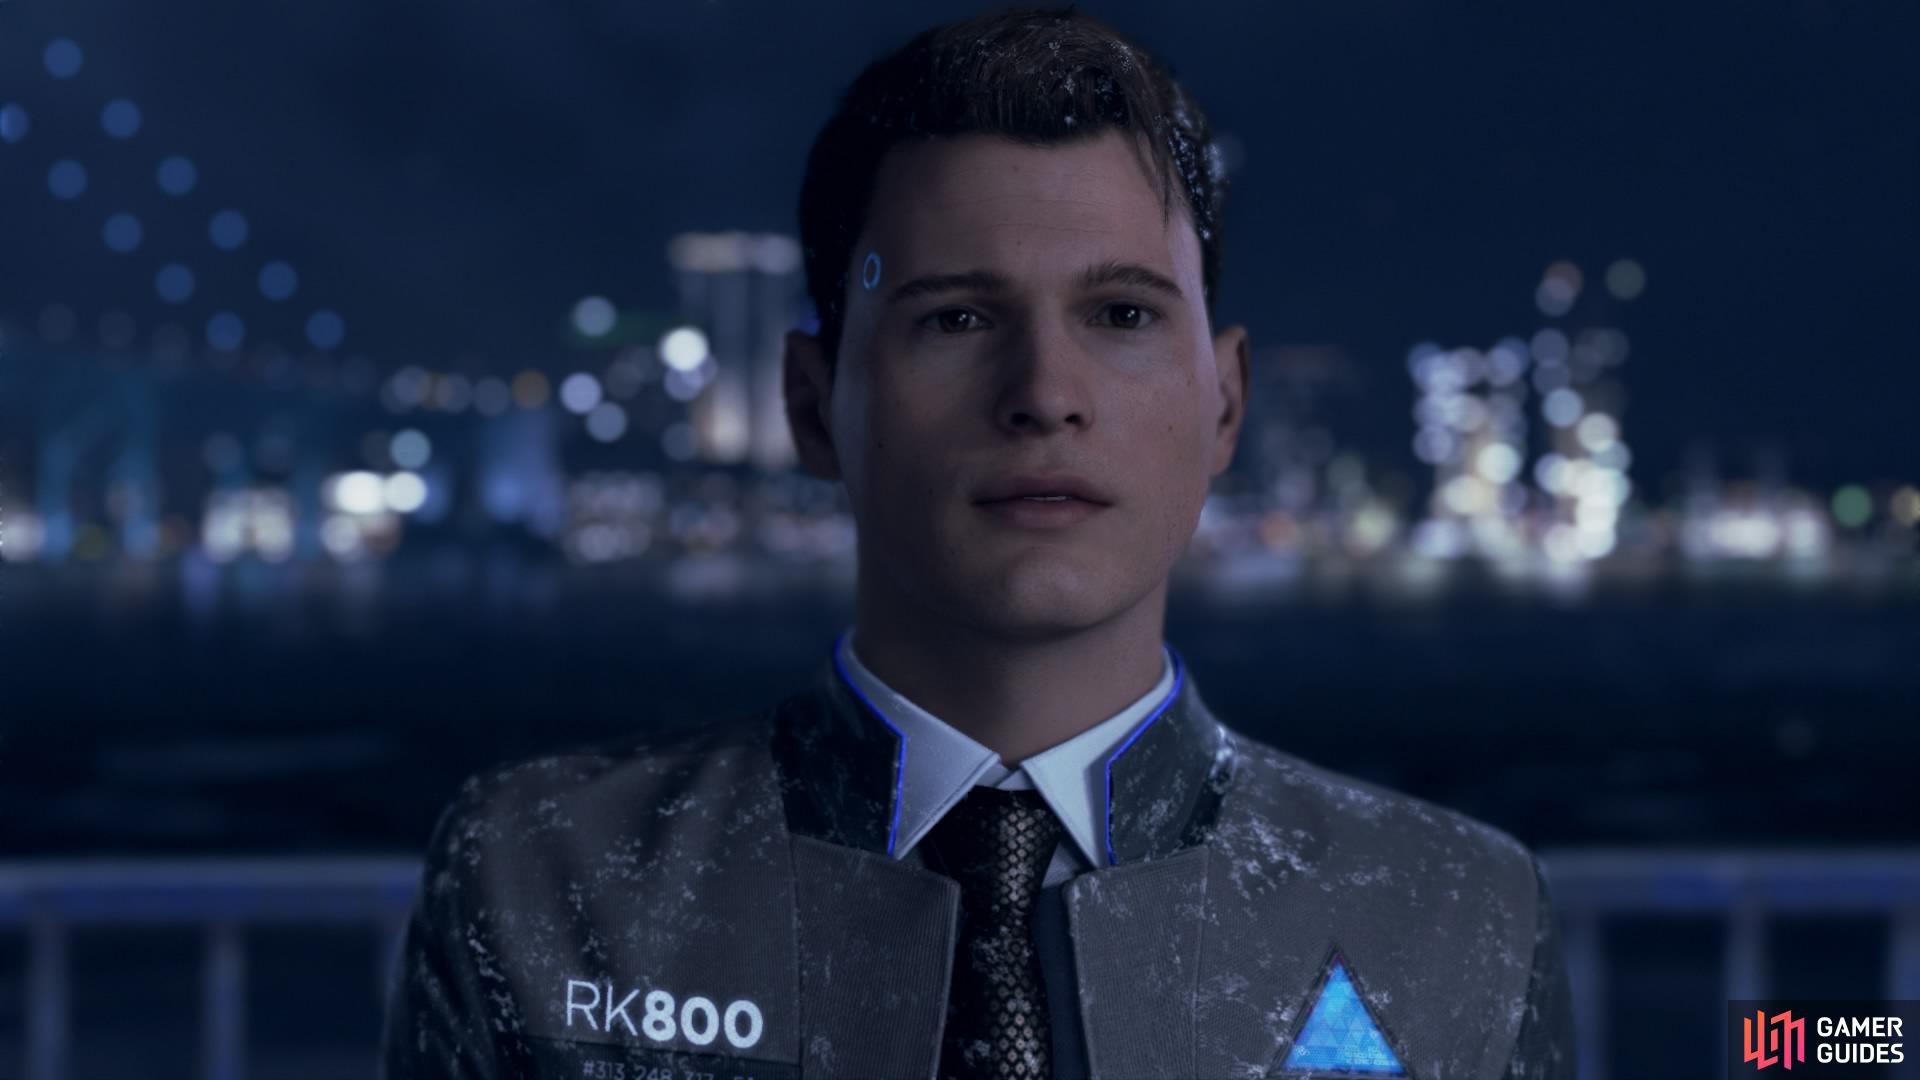 This is my favourite facial expression in the entire gameplay you can't  change my mind 🥵 : r/DetroitBecomeHuman